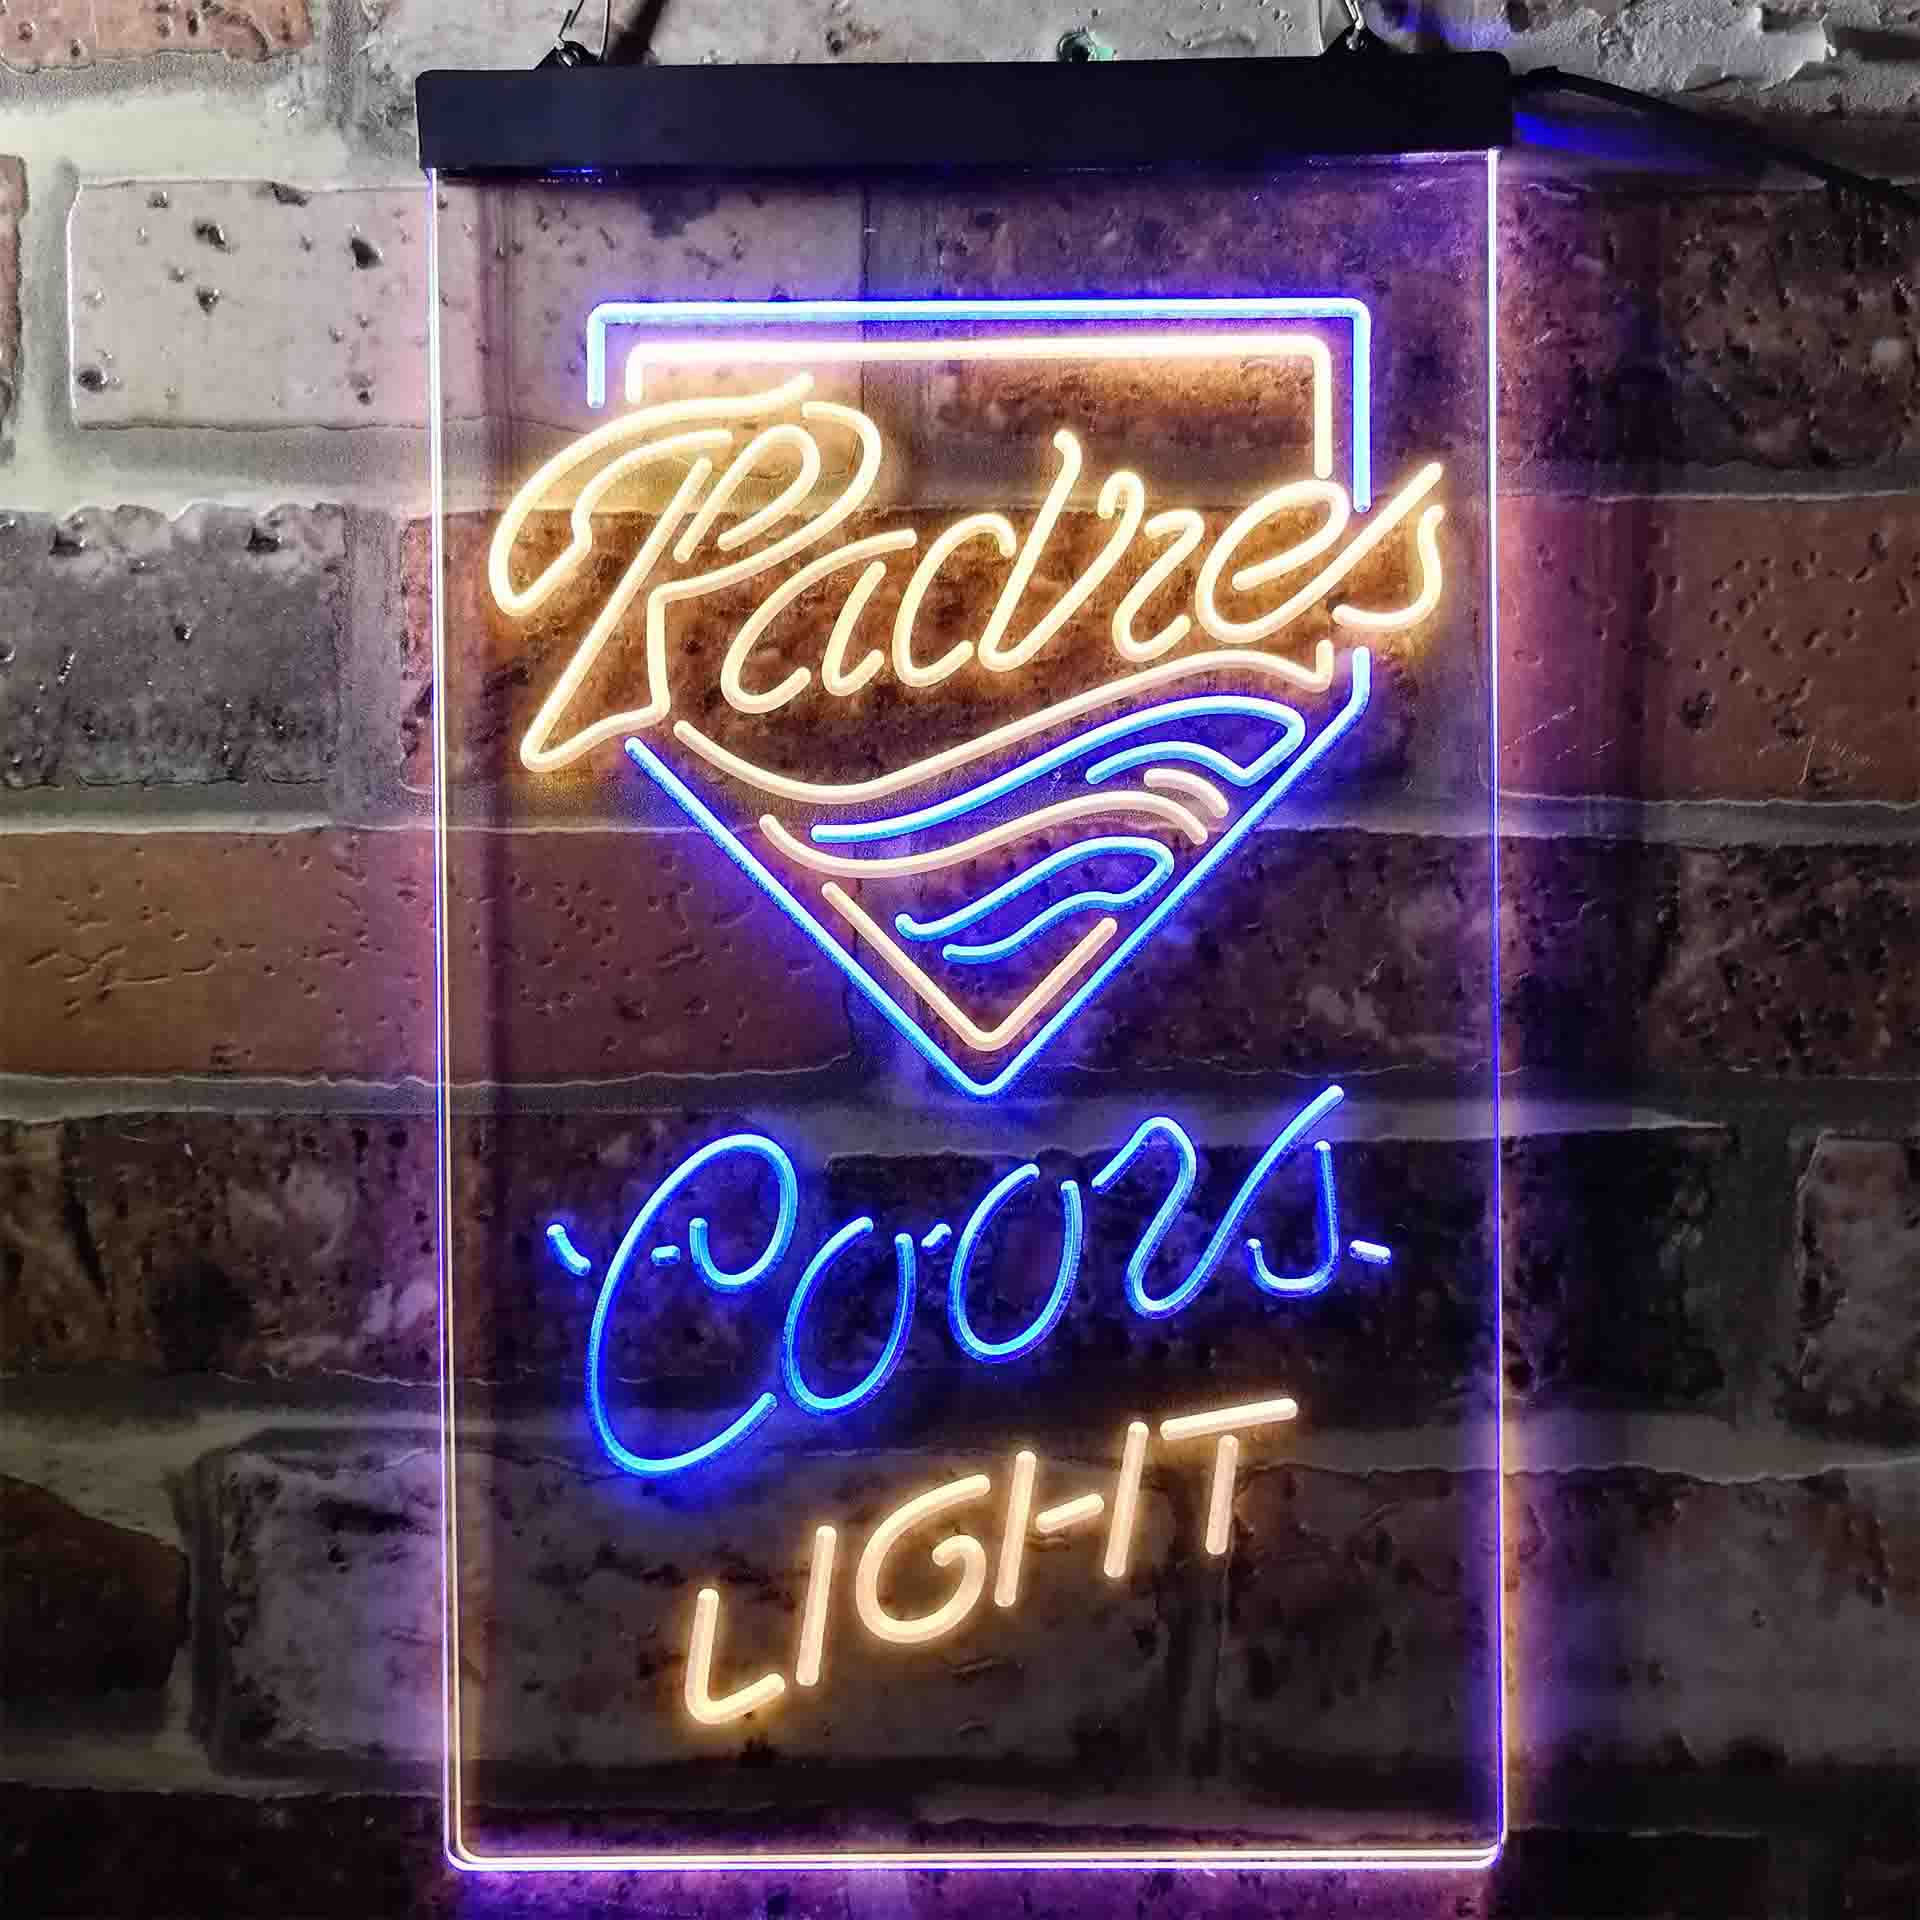 San Diego Padres Coors Light LED Neon Sign